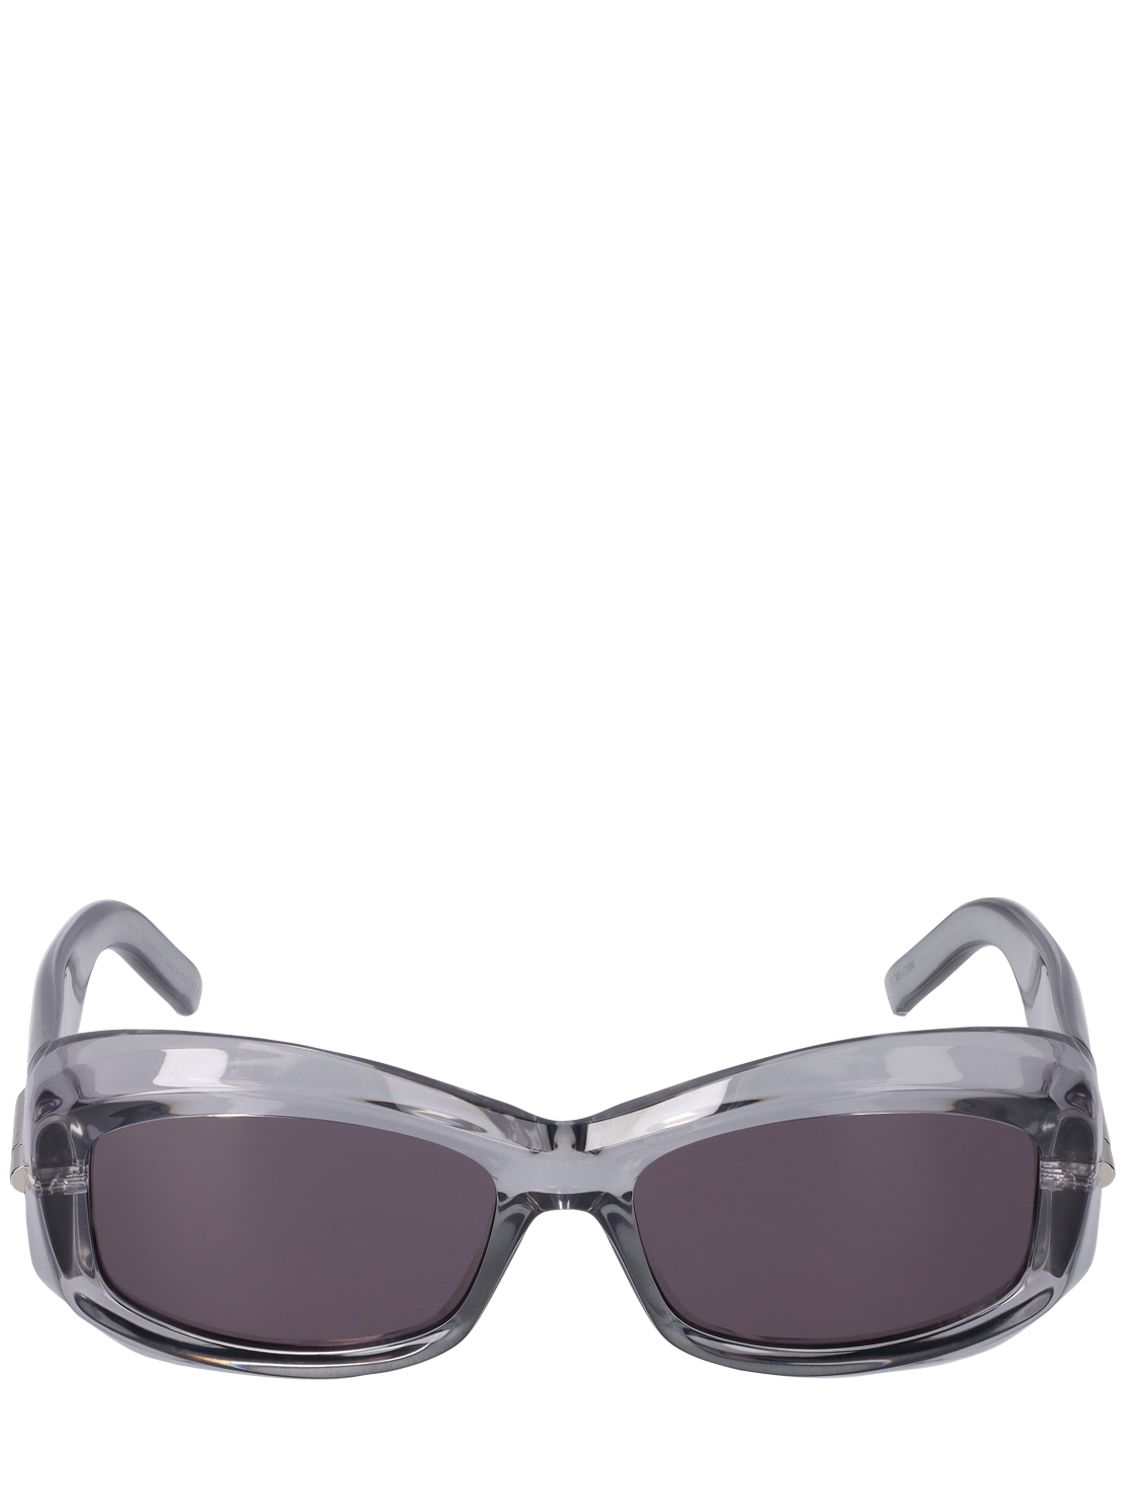 Givenchy G180 Geometric Sunglasses In Gray